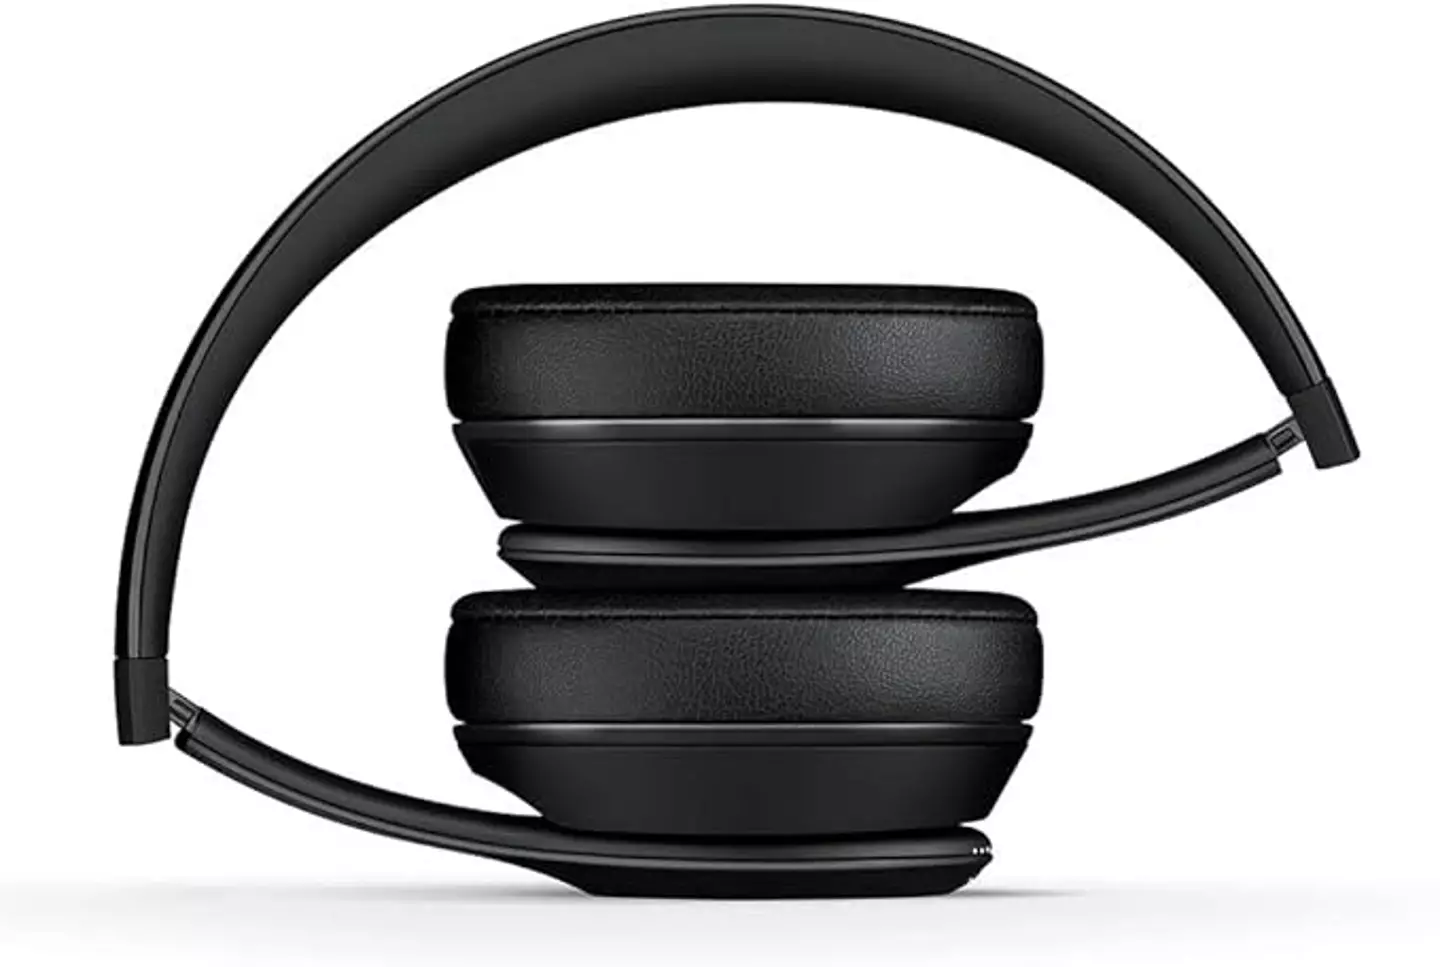 The compact design makes these headphones great for travelling.